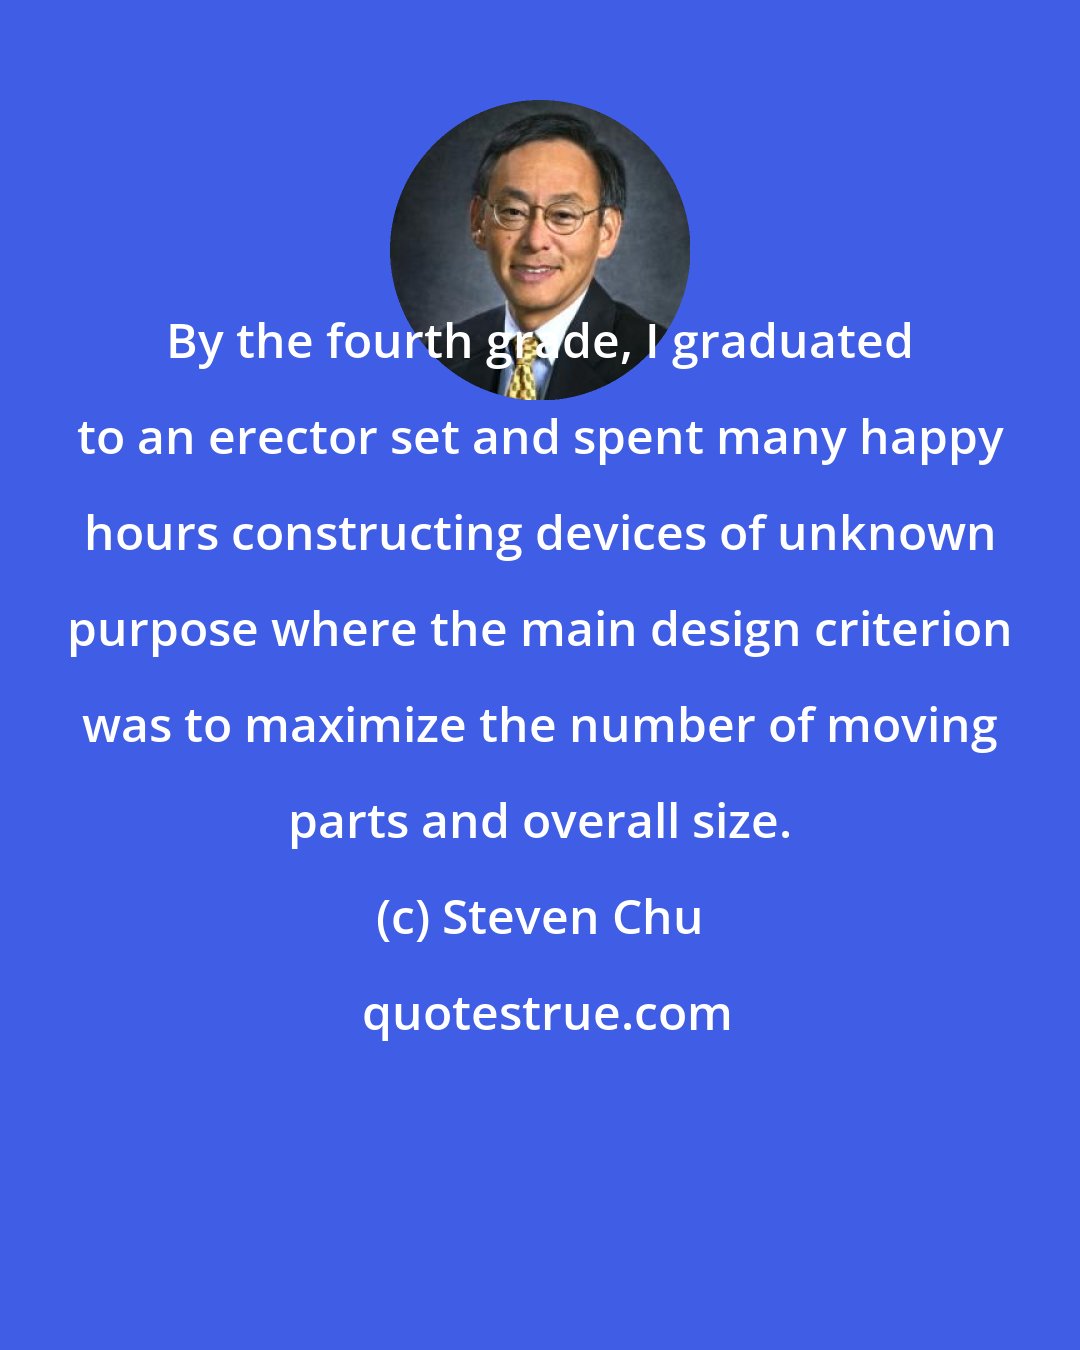 Steven Chu: By the fourth grade, I graduated to an erector set and spent many happy hours constructing devices of unknown purpose where the main design criterion was to maximize the number of moving parts and overall size.